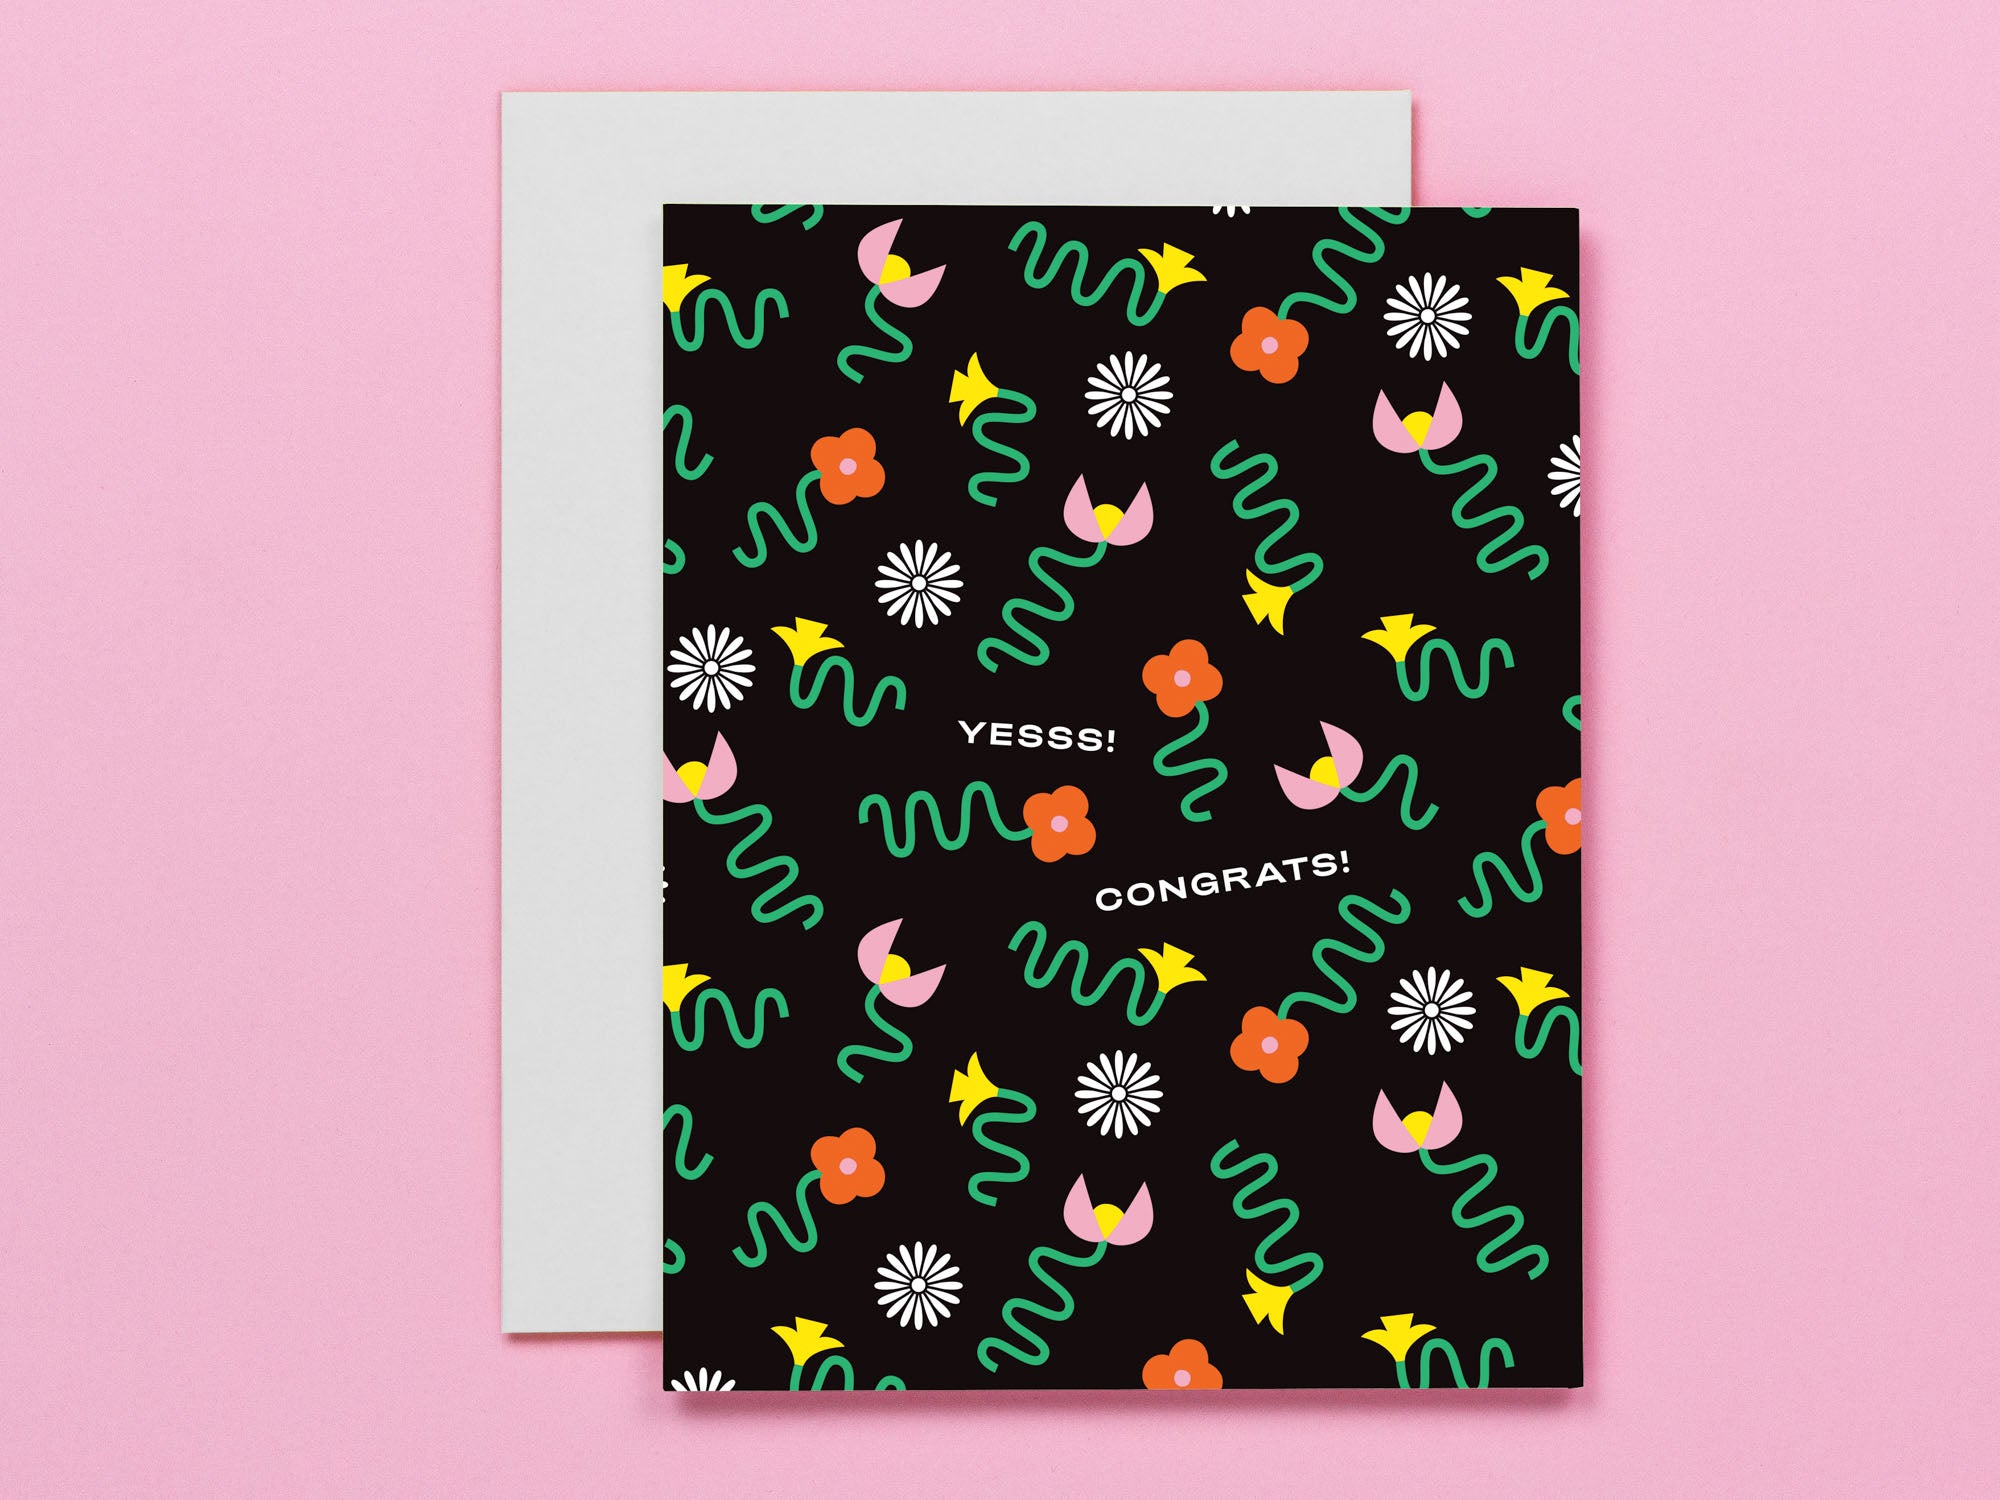 Yesss! Congrats! congratulations card with squiggle-infused florals. Made in USA by My Darlin' @mydarlin_bk